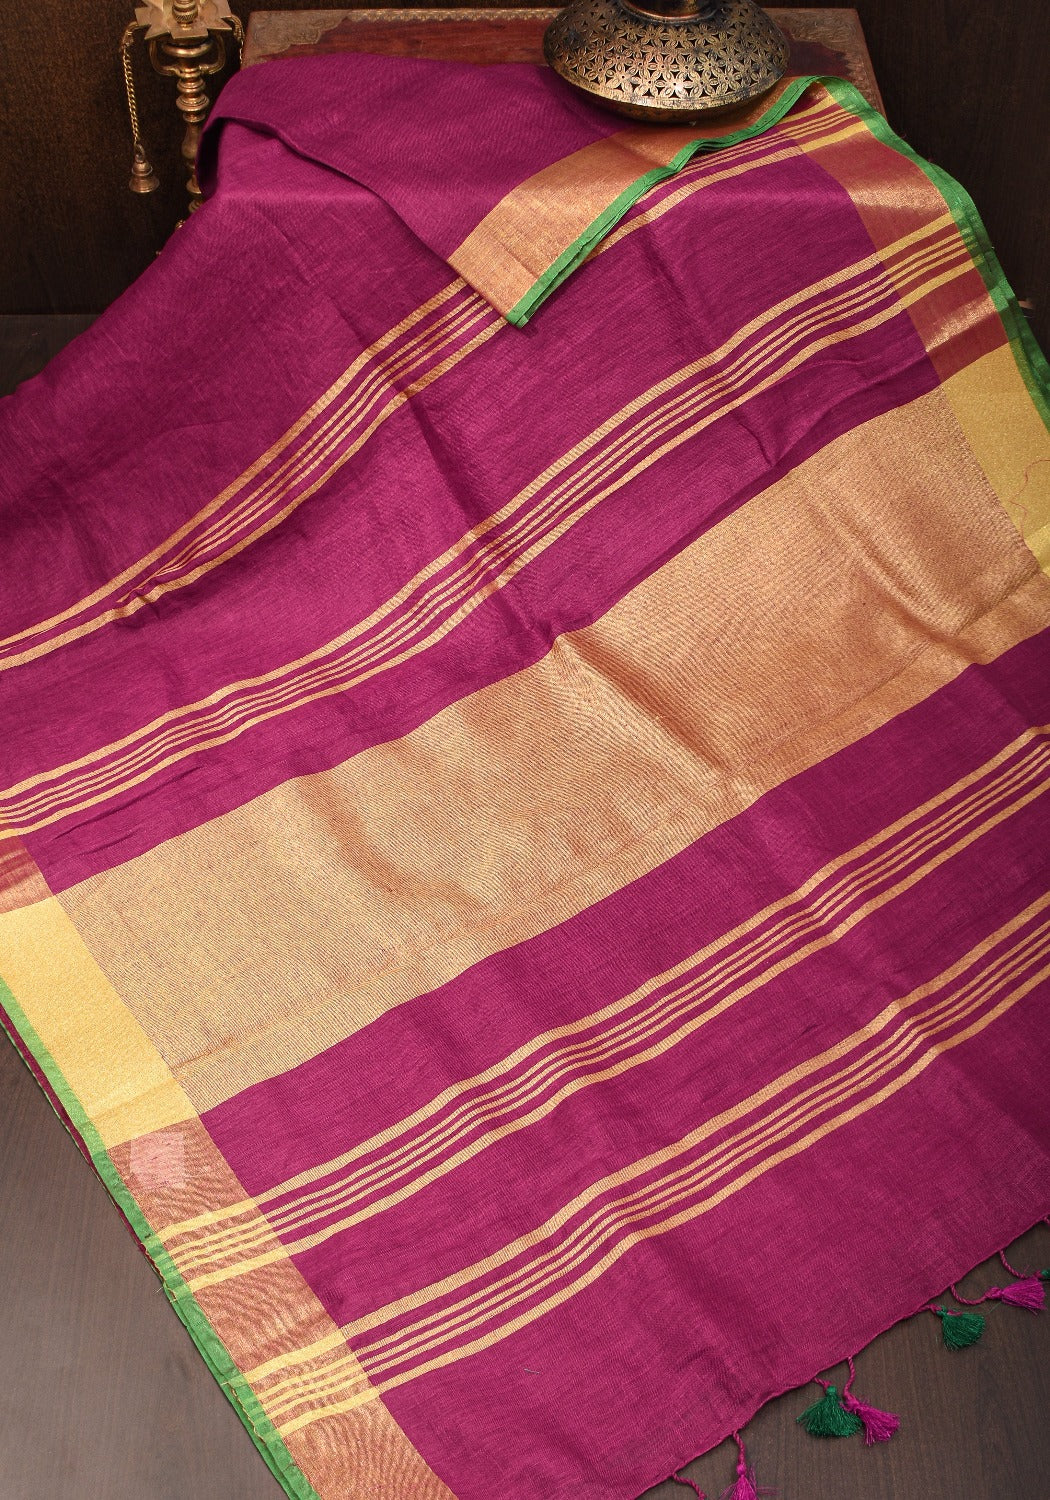 Magenta Pink and Green Linen Saree with Gold Zari Border and Green Selvedge